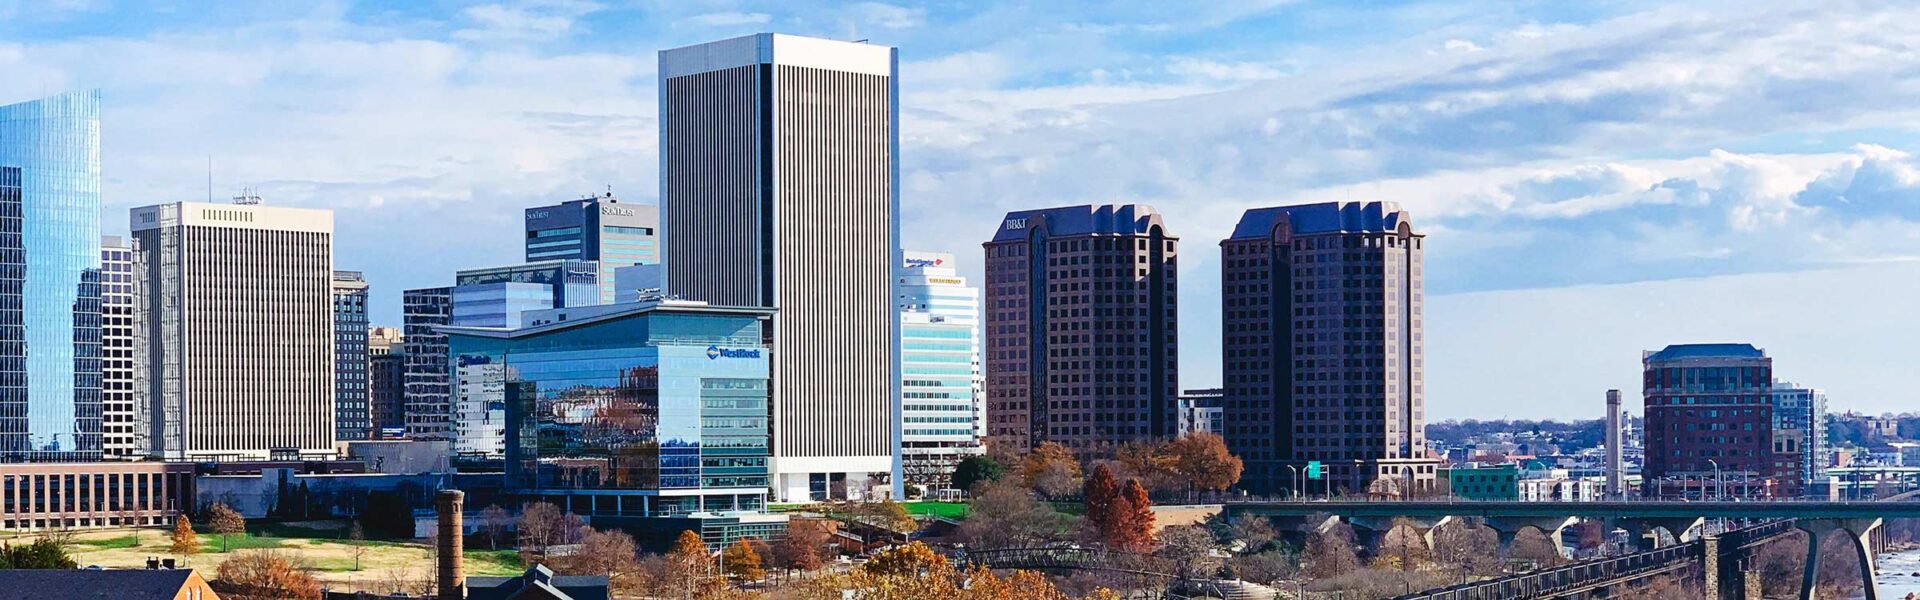 The skyline of Richmond, Virginia in the daytime with with skyscrapers in the foreground.